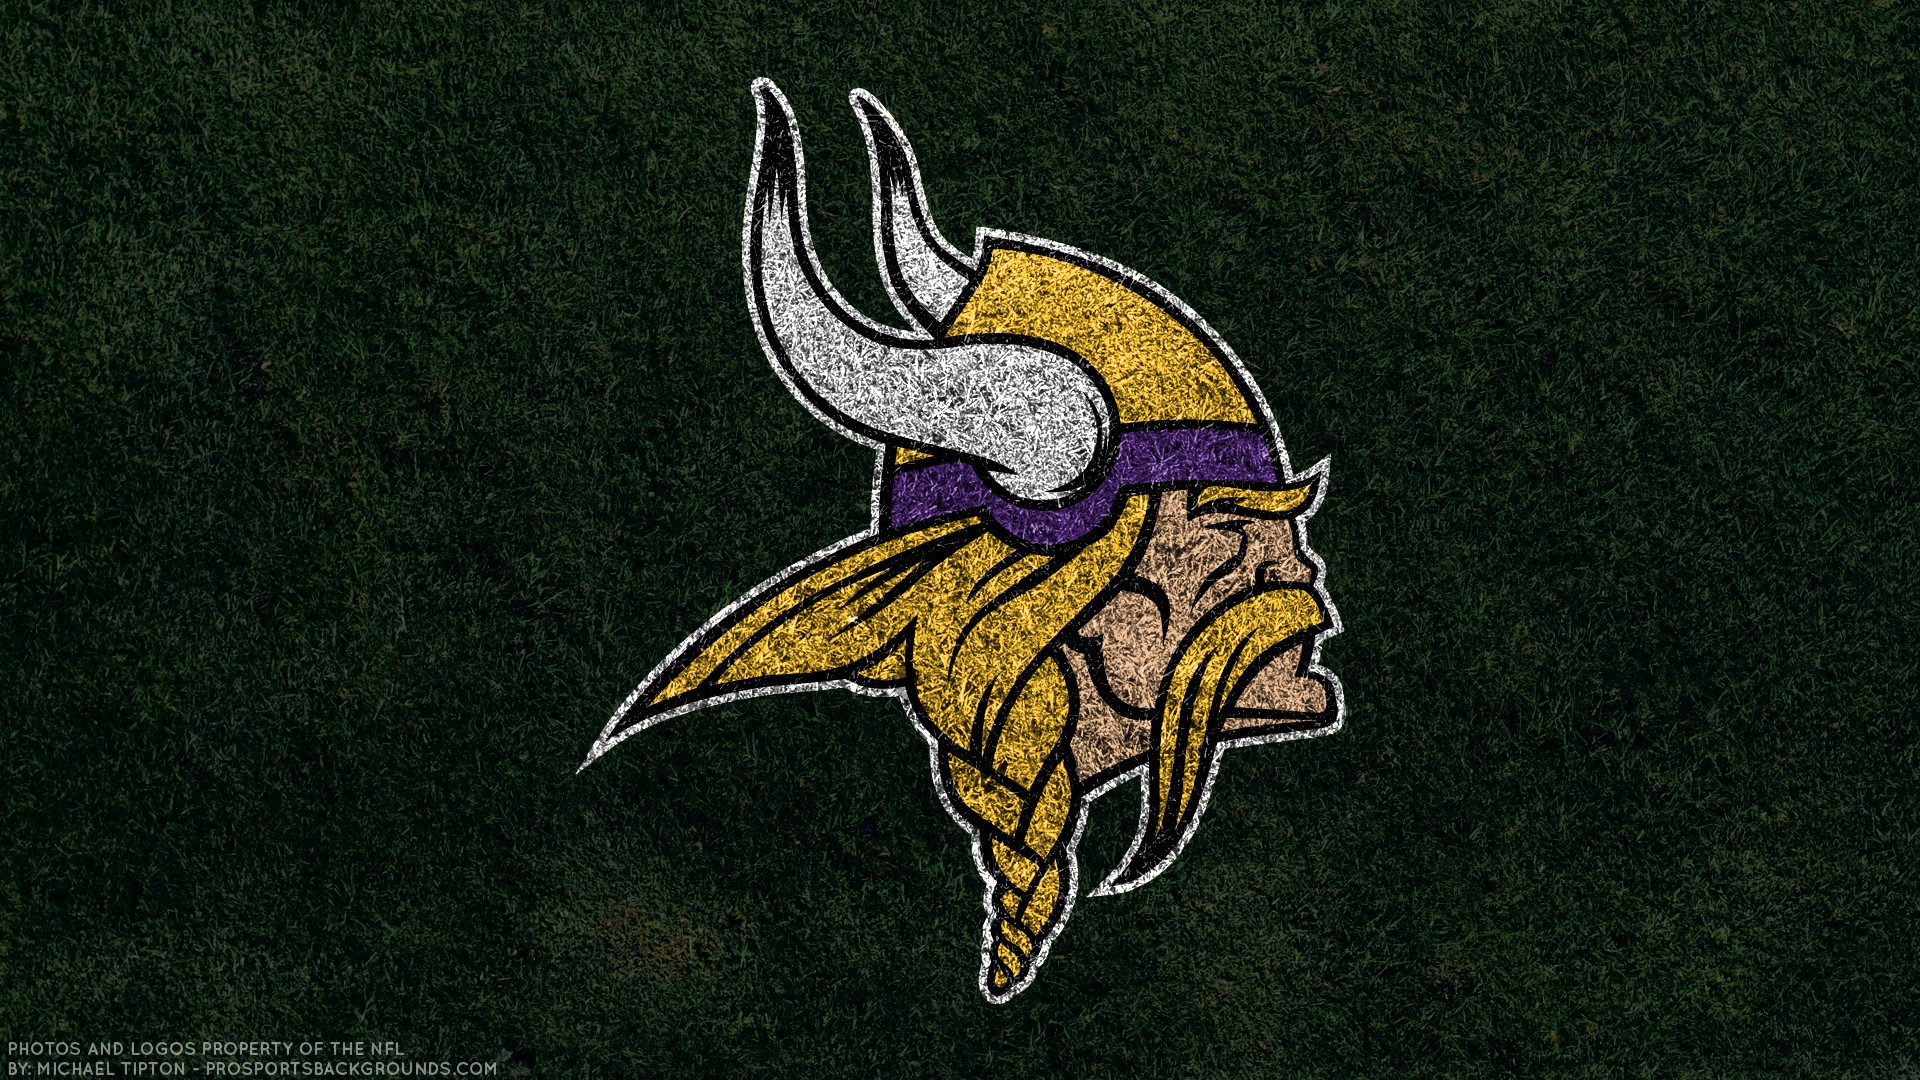 Minnesota Vikings Wallpaper For Mac Backgrounds With Resolution 1920X1080 pixel. You can make this wallpaper for your Mac or Windows Desktop Background, iPhone, Android or Tablet and another Smartphone device for free